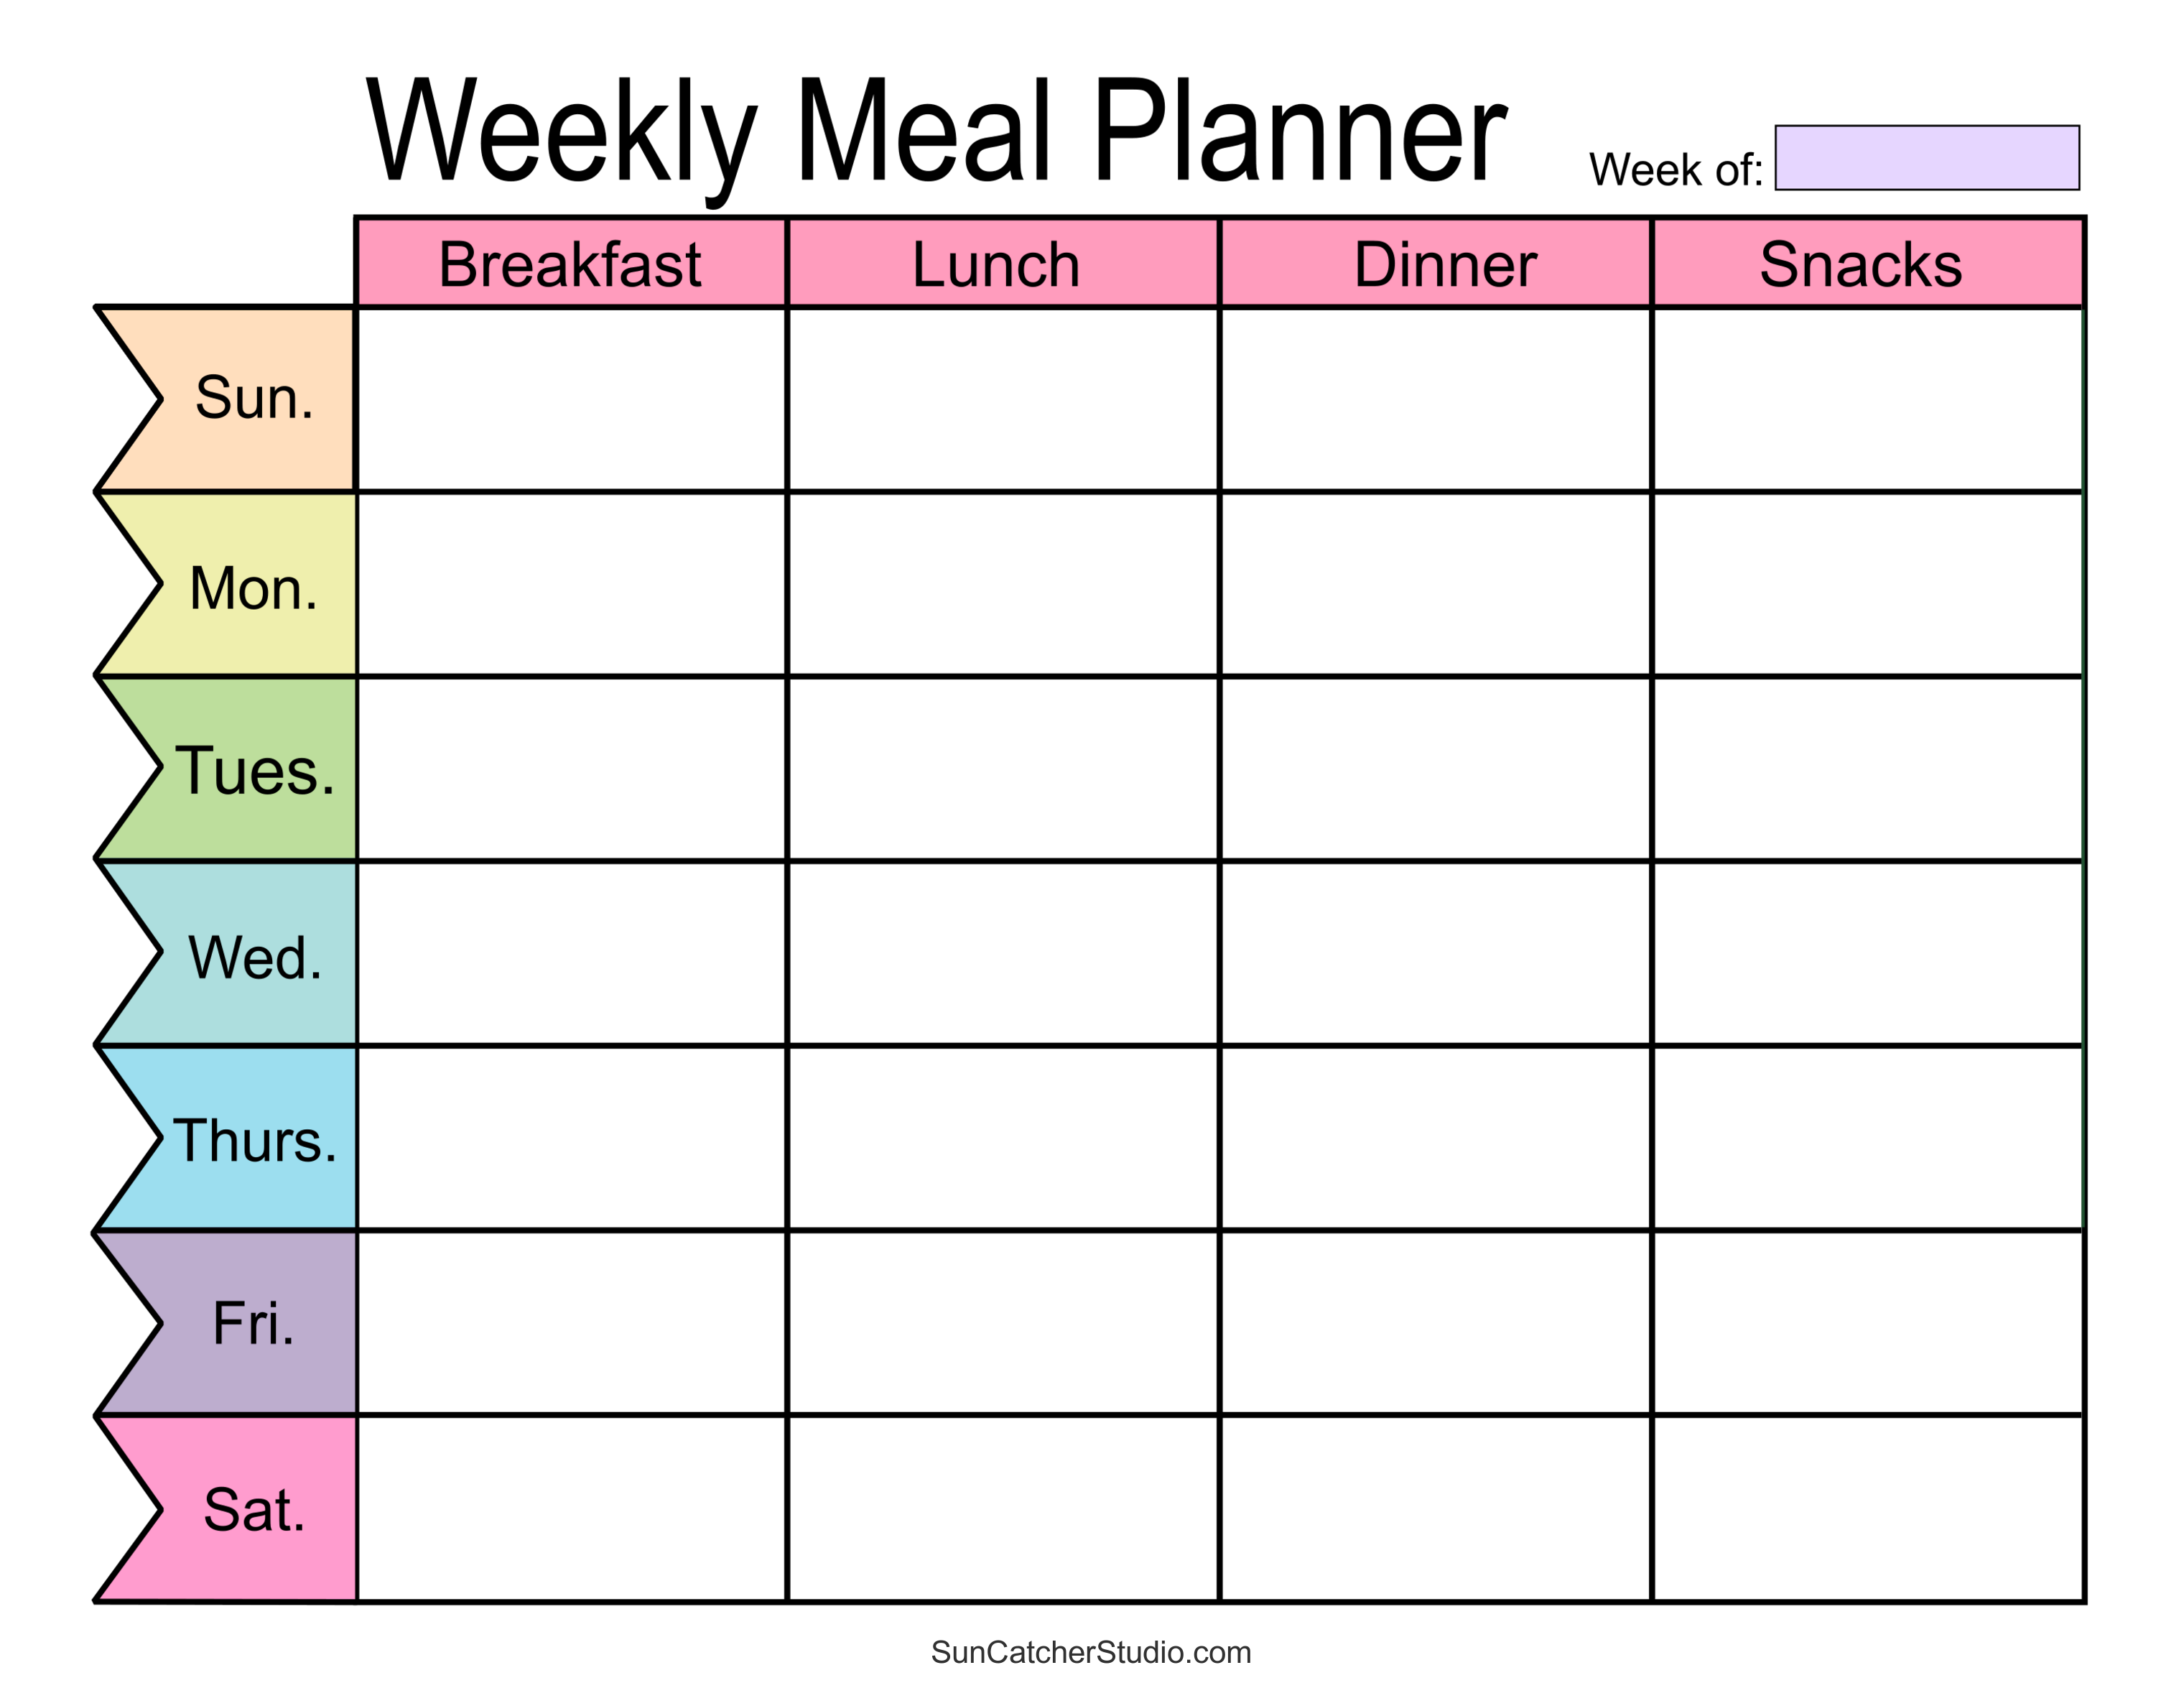 weekly-meal-planner-template-nutrition-teacher-made-lupon-gov-ph